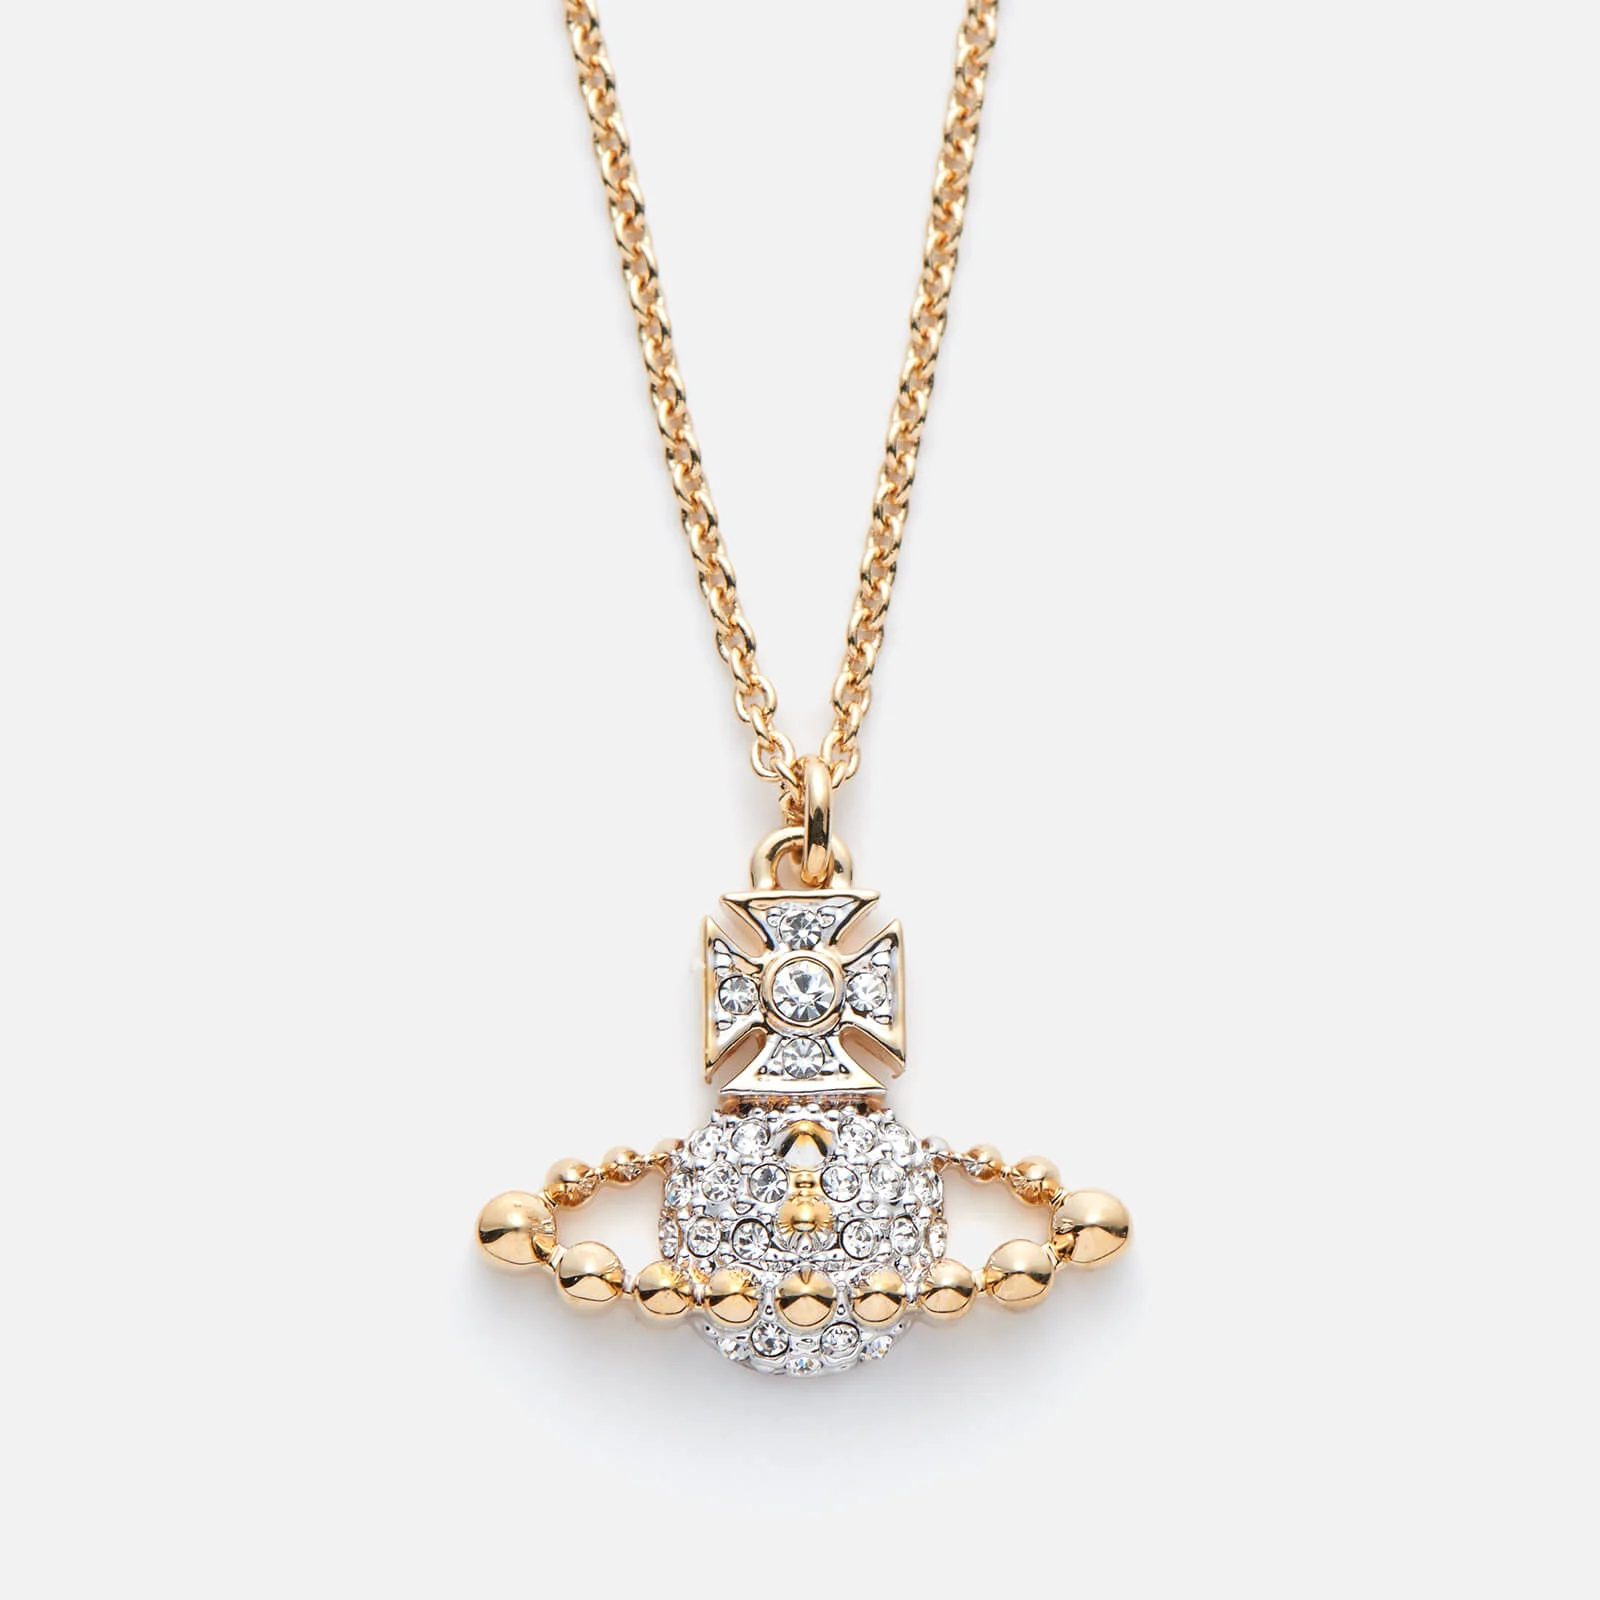 Vivienne Westwood Women's Lena Small Bas Relief Pendant - Crystal/Rhodium/Gold Image 1